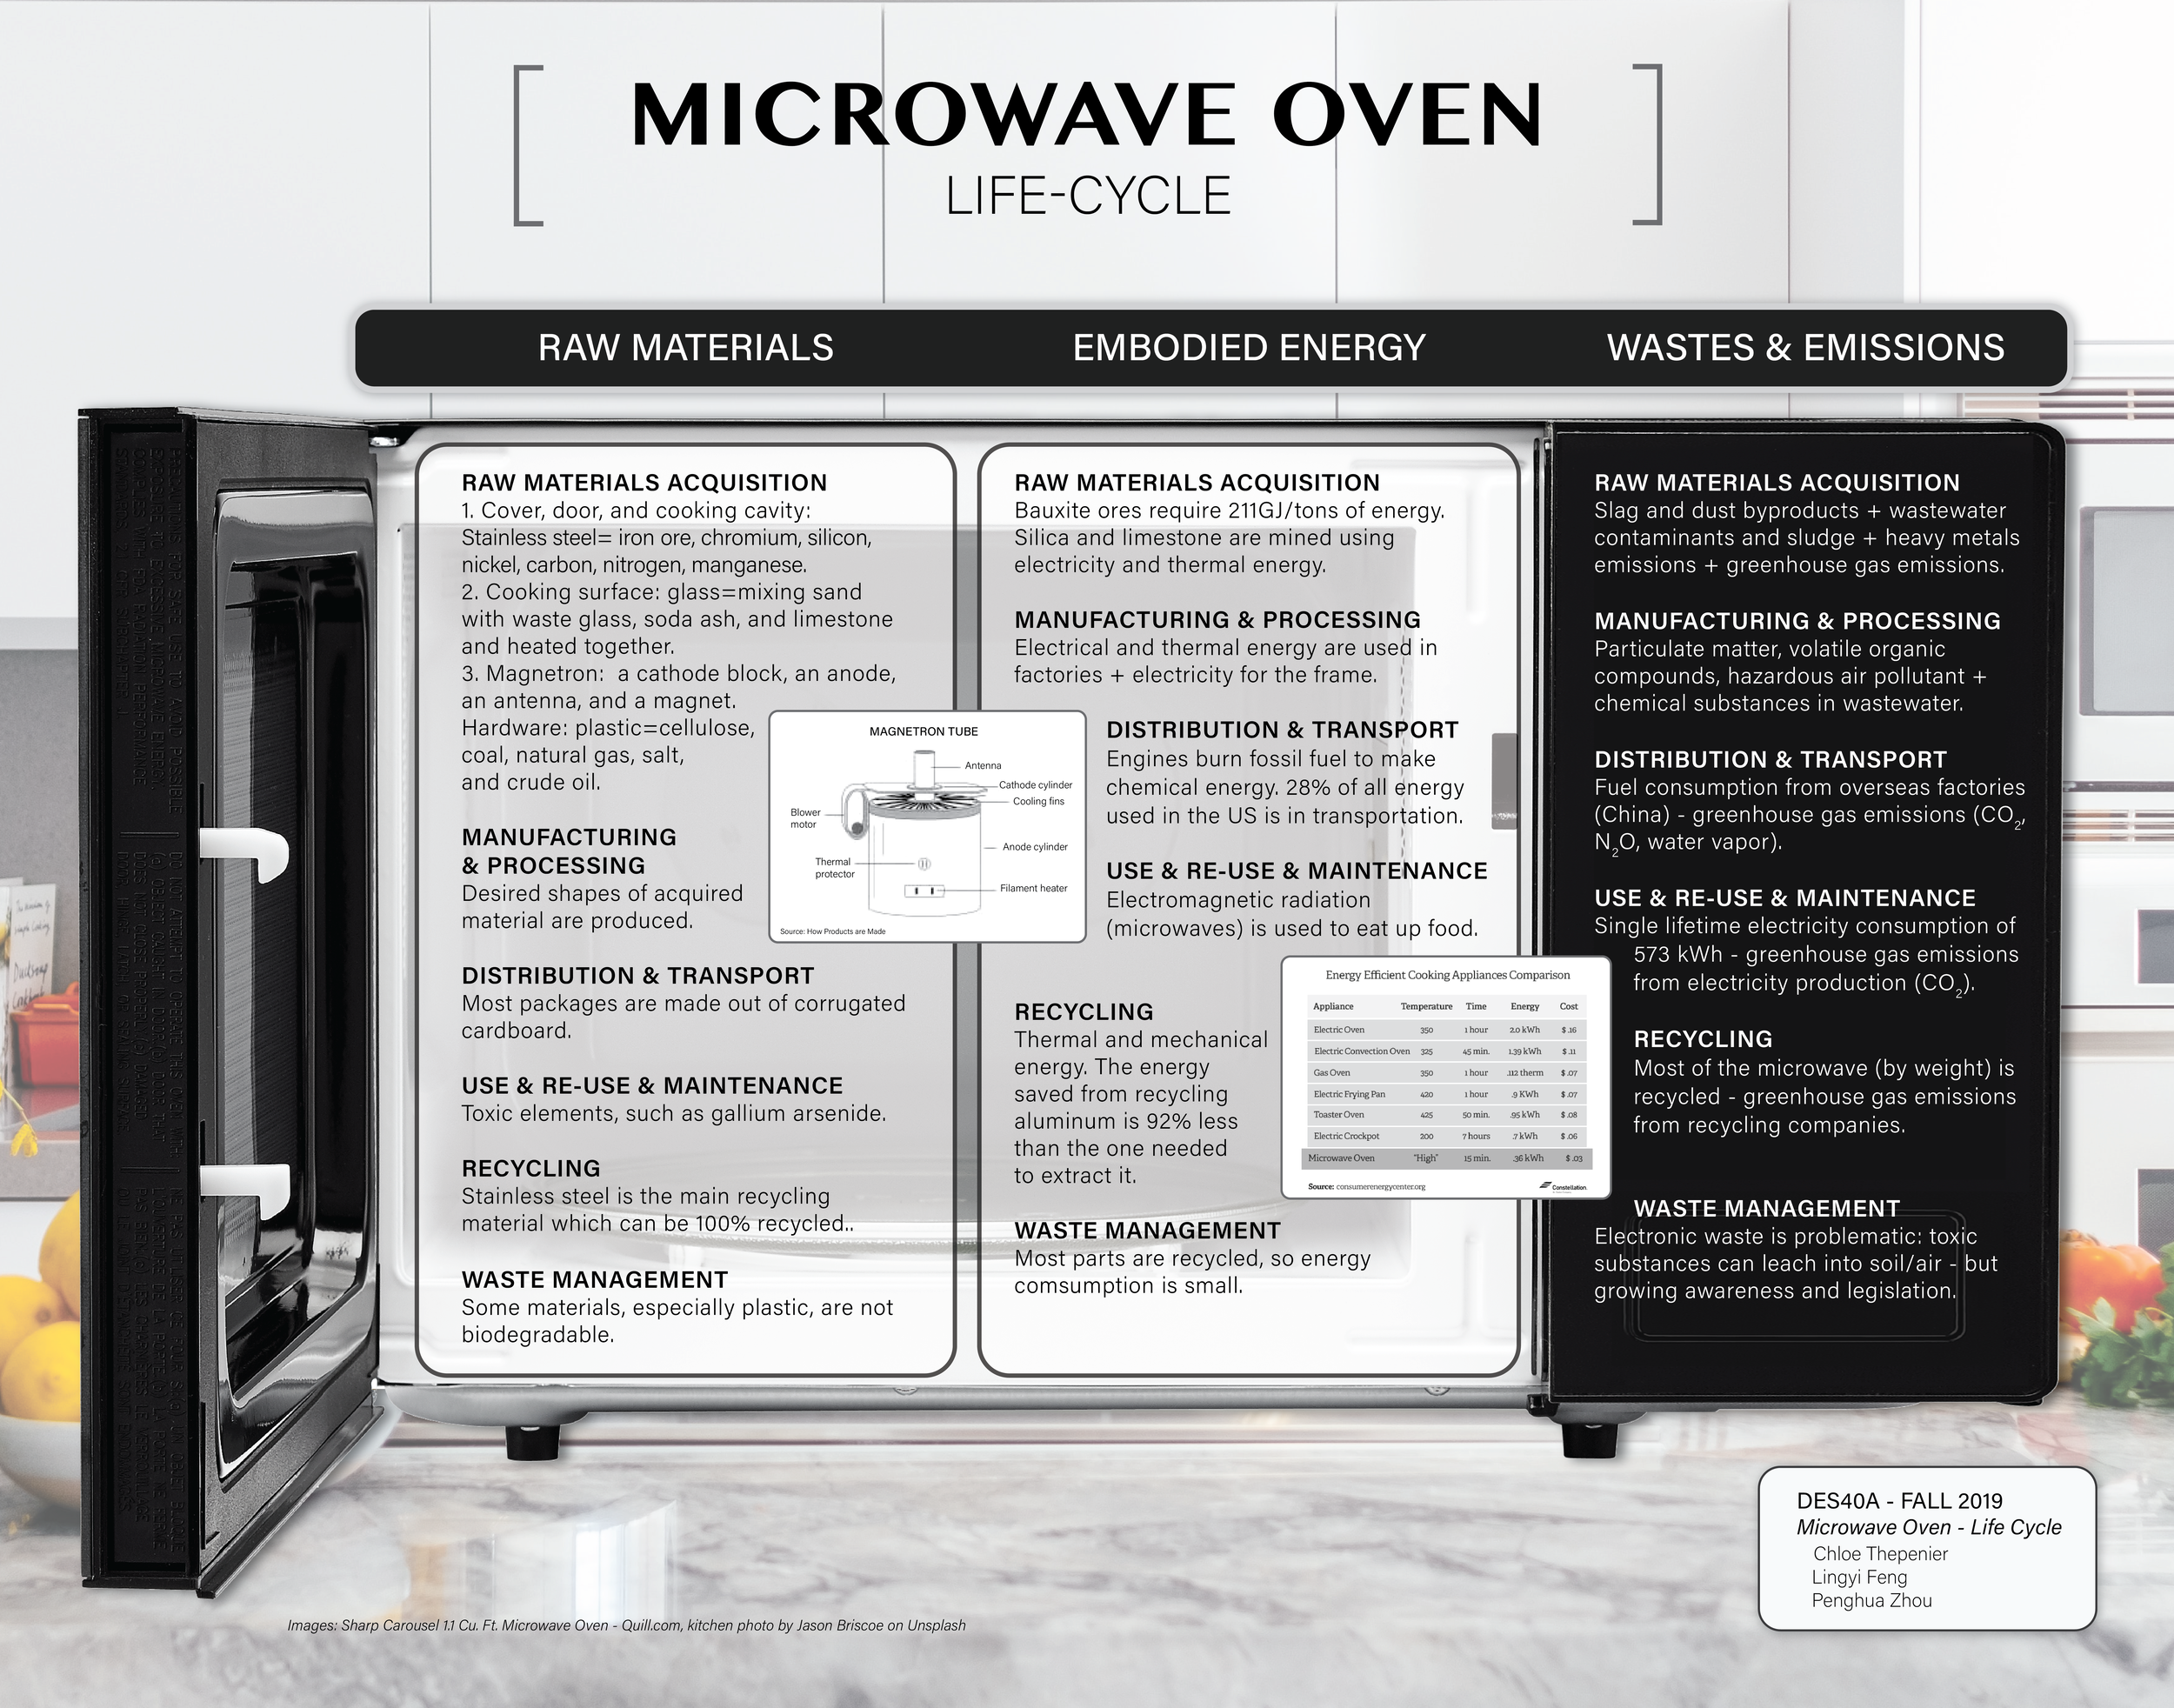 Many Europeans lack knowledge of proper microwave use